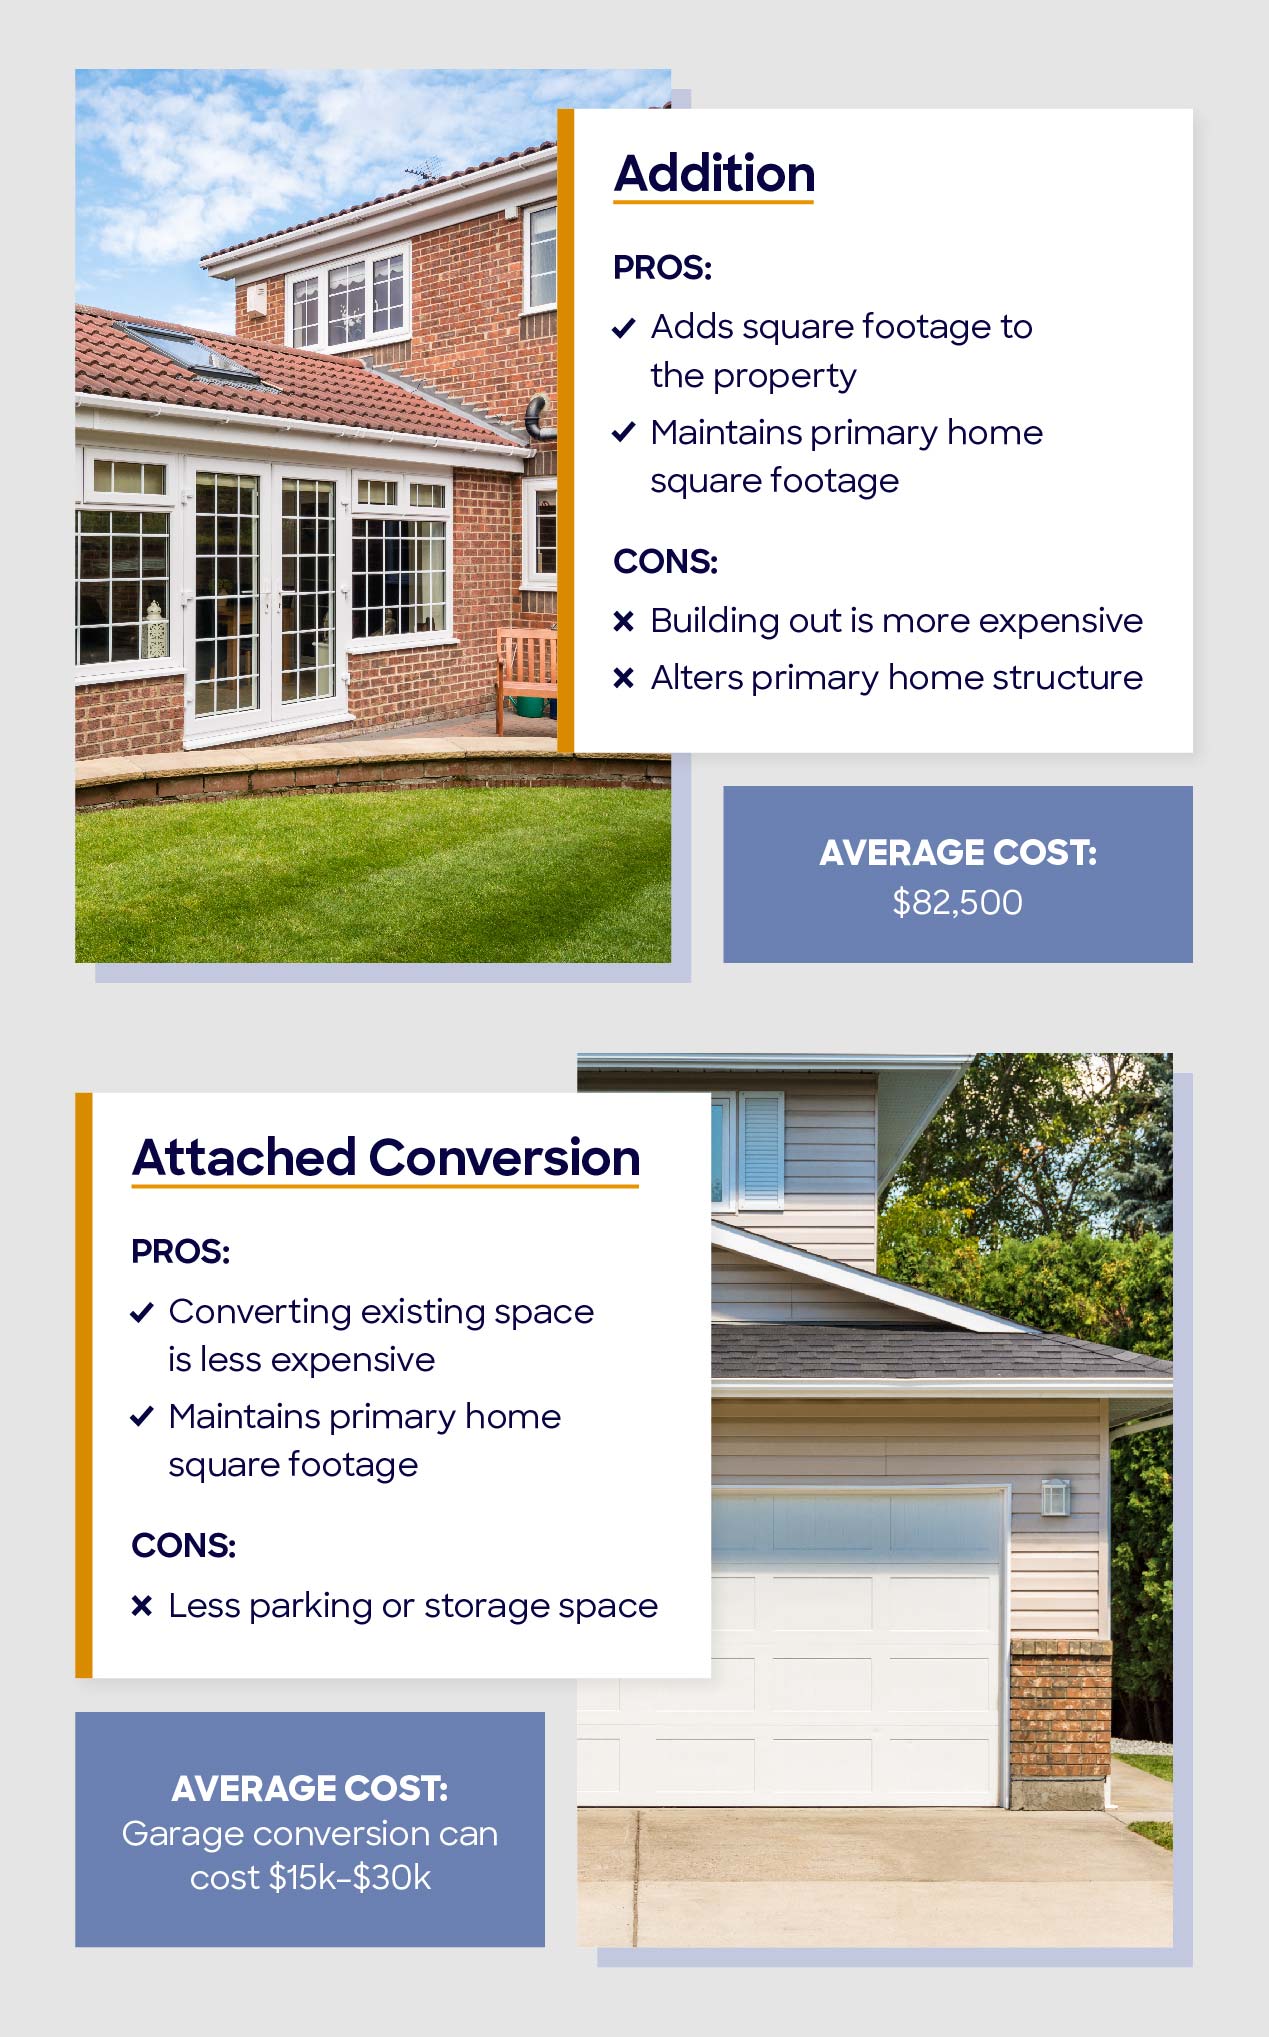 ADU Addition and Attached Conversion graphic